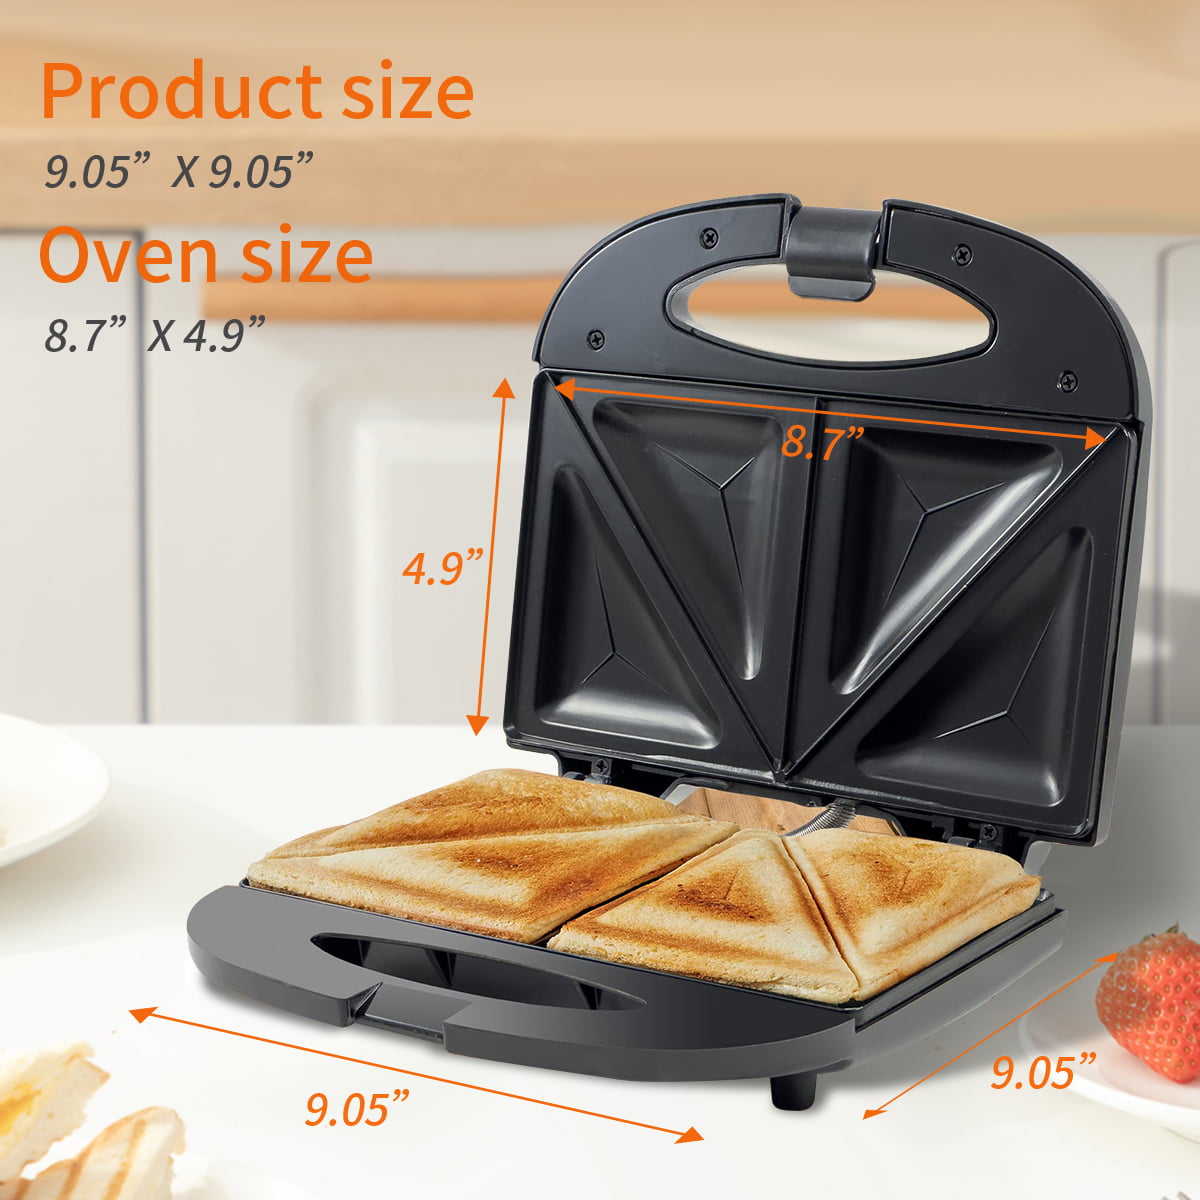 Tiastar Panini Press Sandwich Maker, Sandwich Press with Indicator Lights, Cool Touch Handle, Non-Stick Coated Plates, 750W, Black